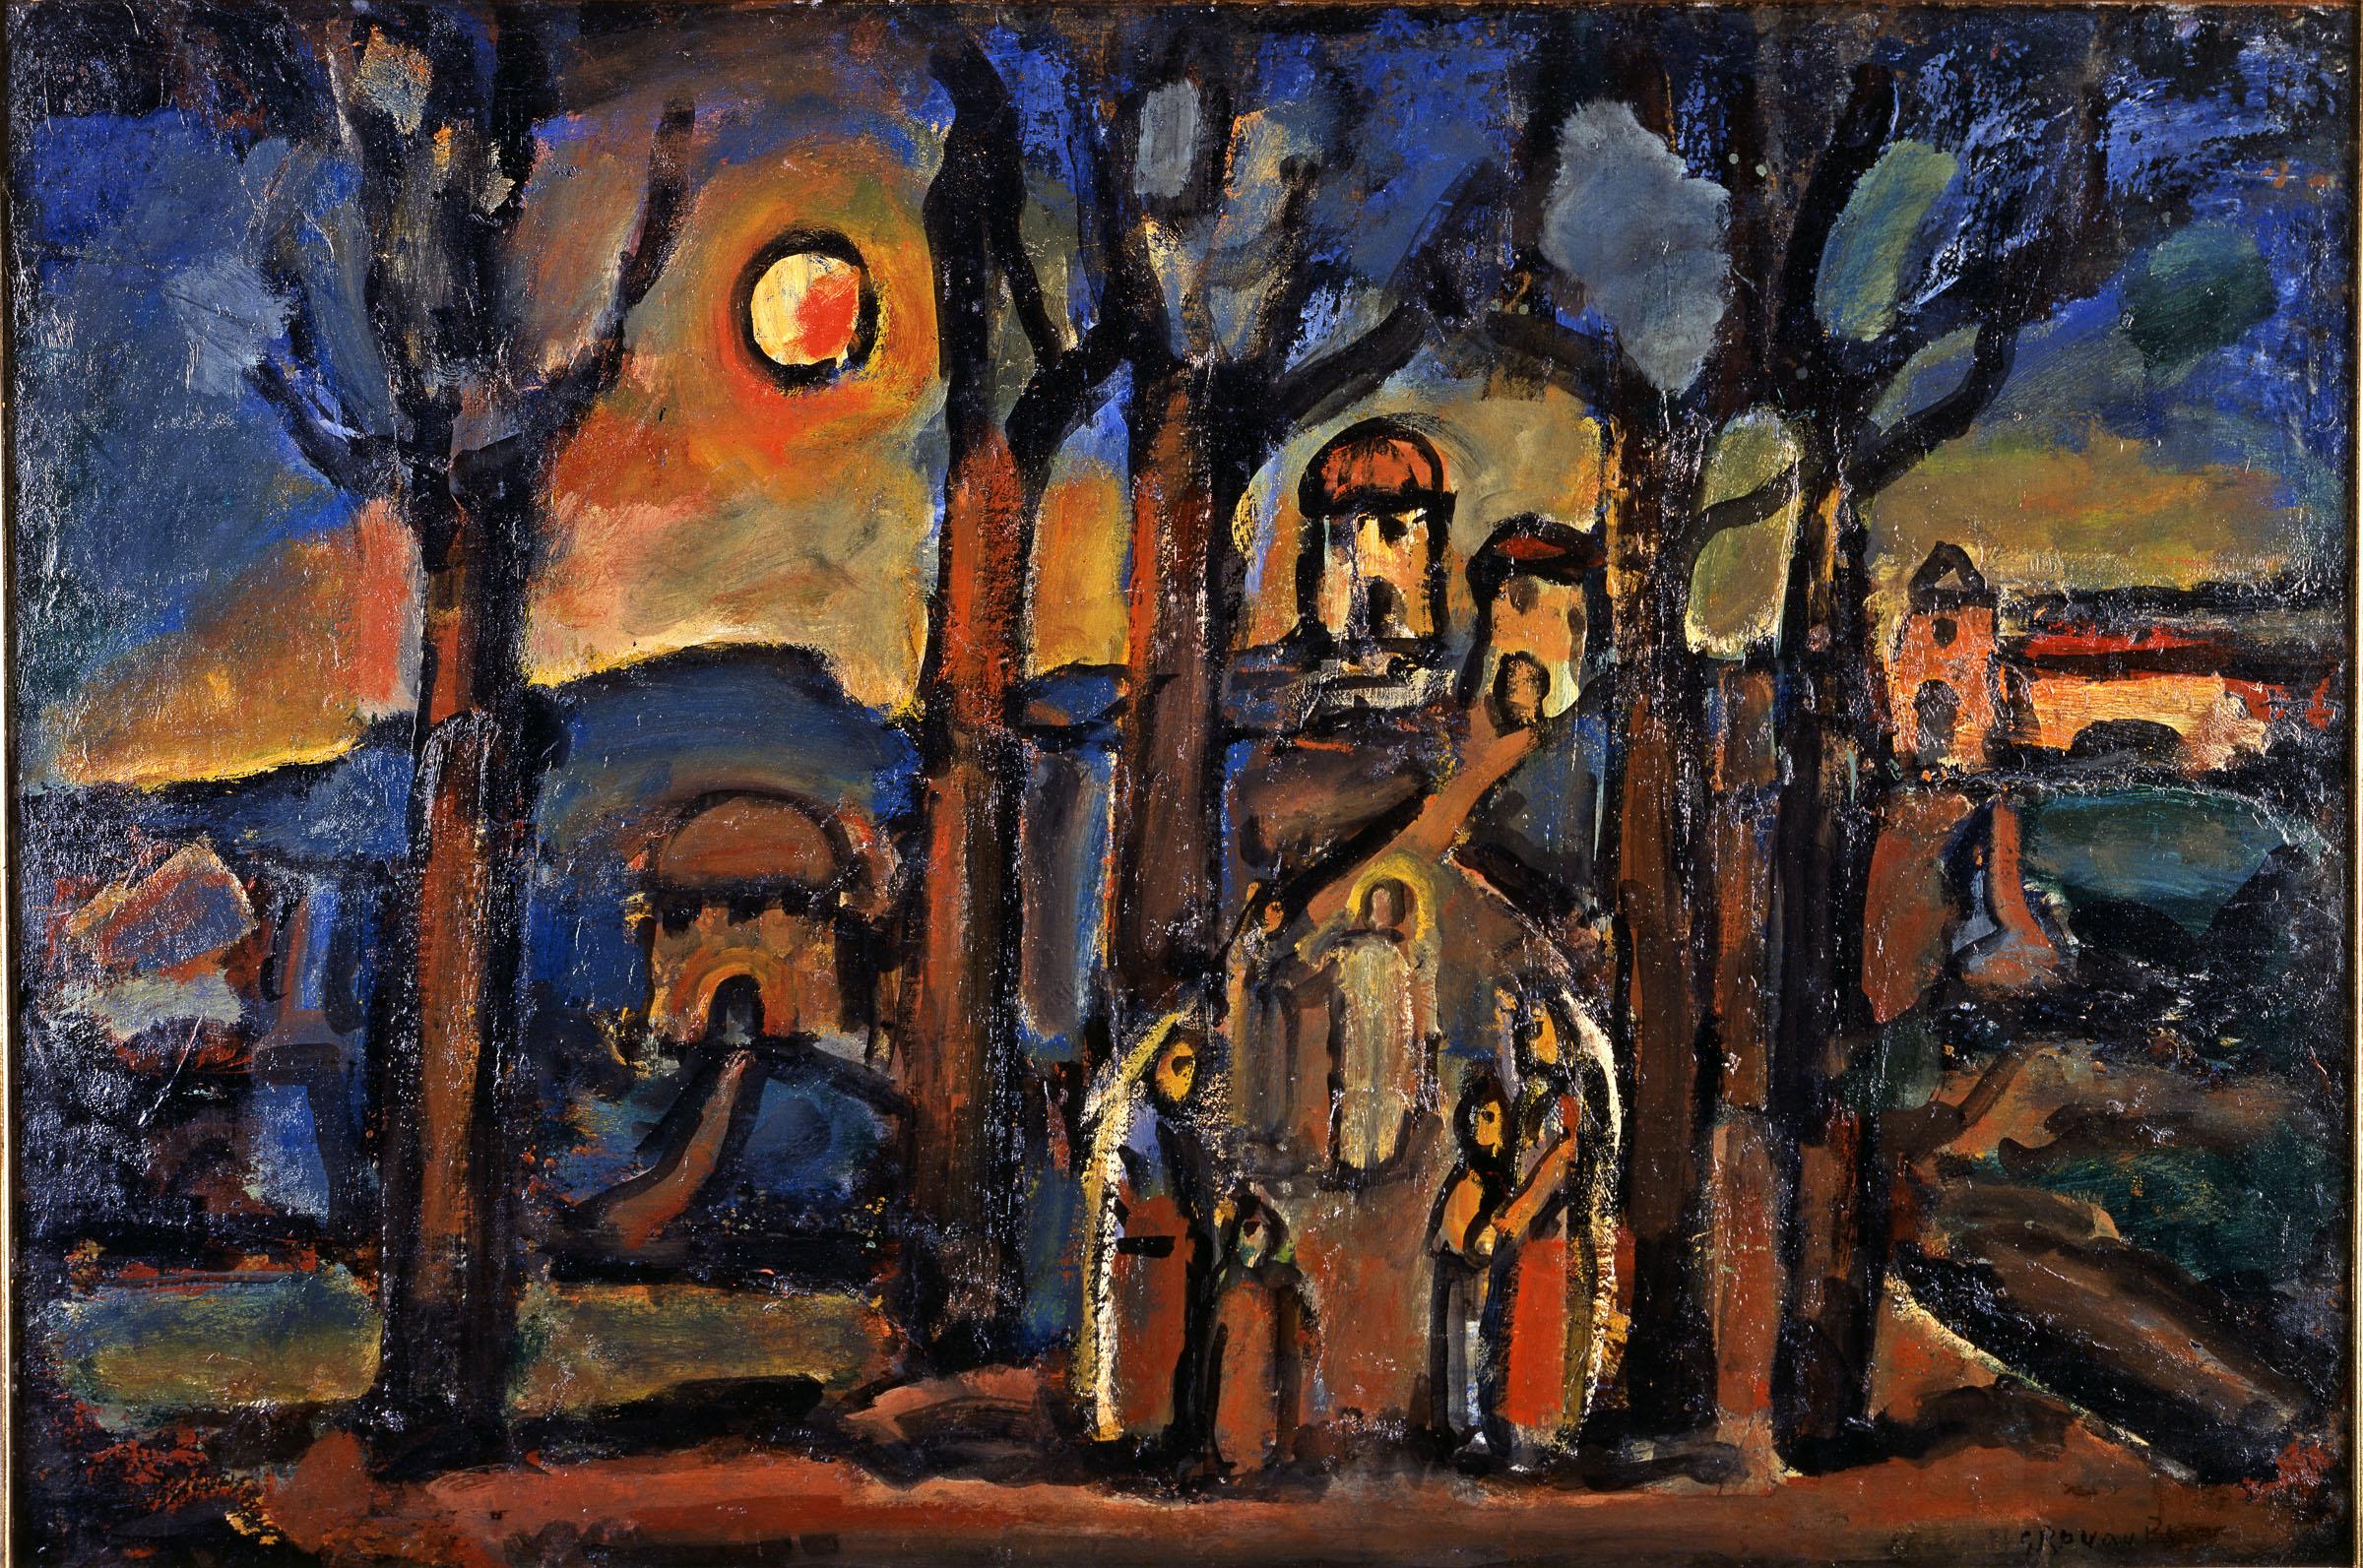 Dipinto: GEORGES ROUAULT, Autunno a Nazareth, 1957